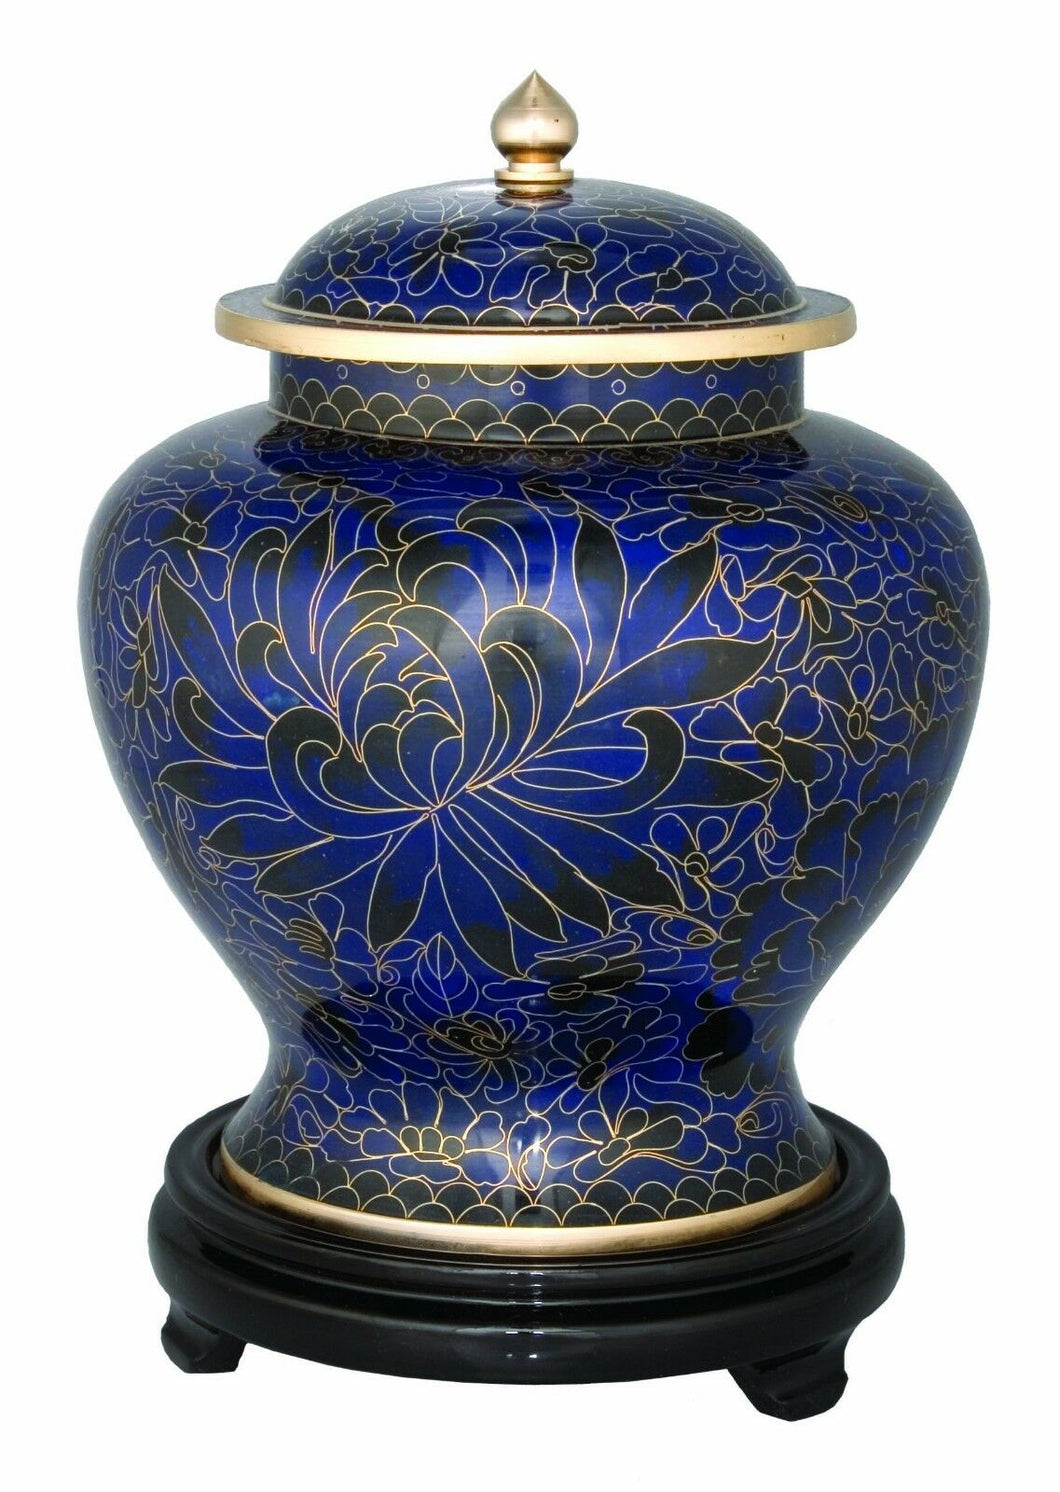 Large/Adult 220 cubic inches Royal Blue Cloisonne Cremation Urn for Ashes